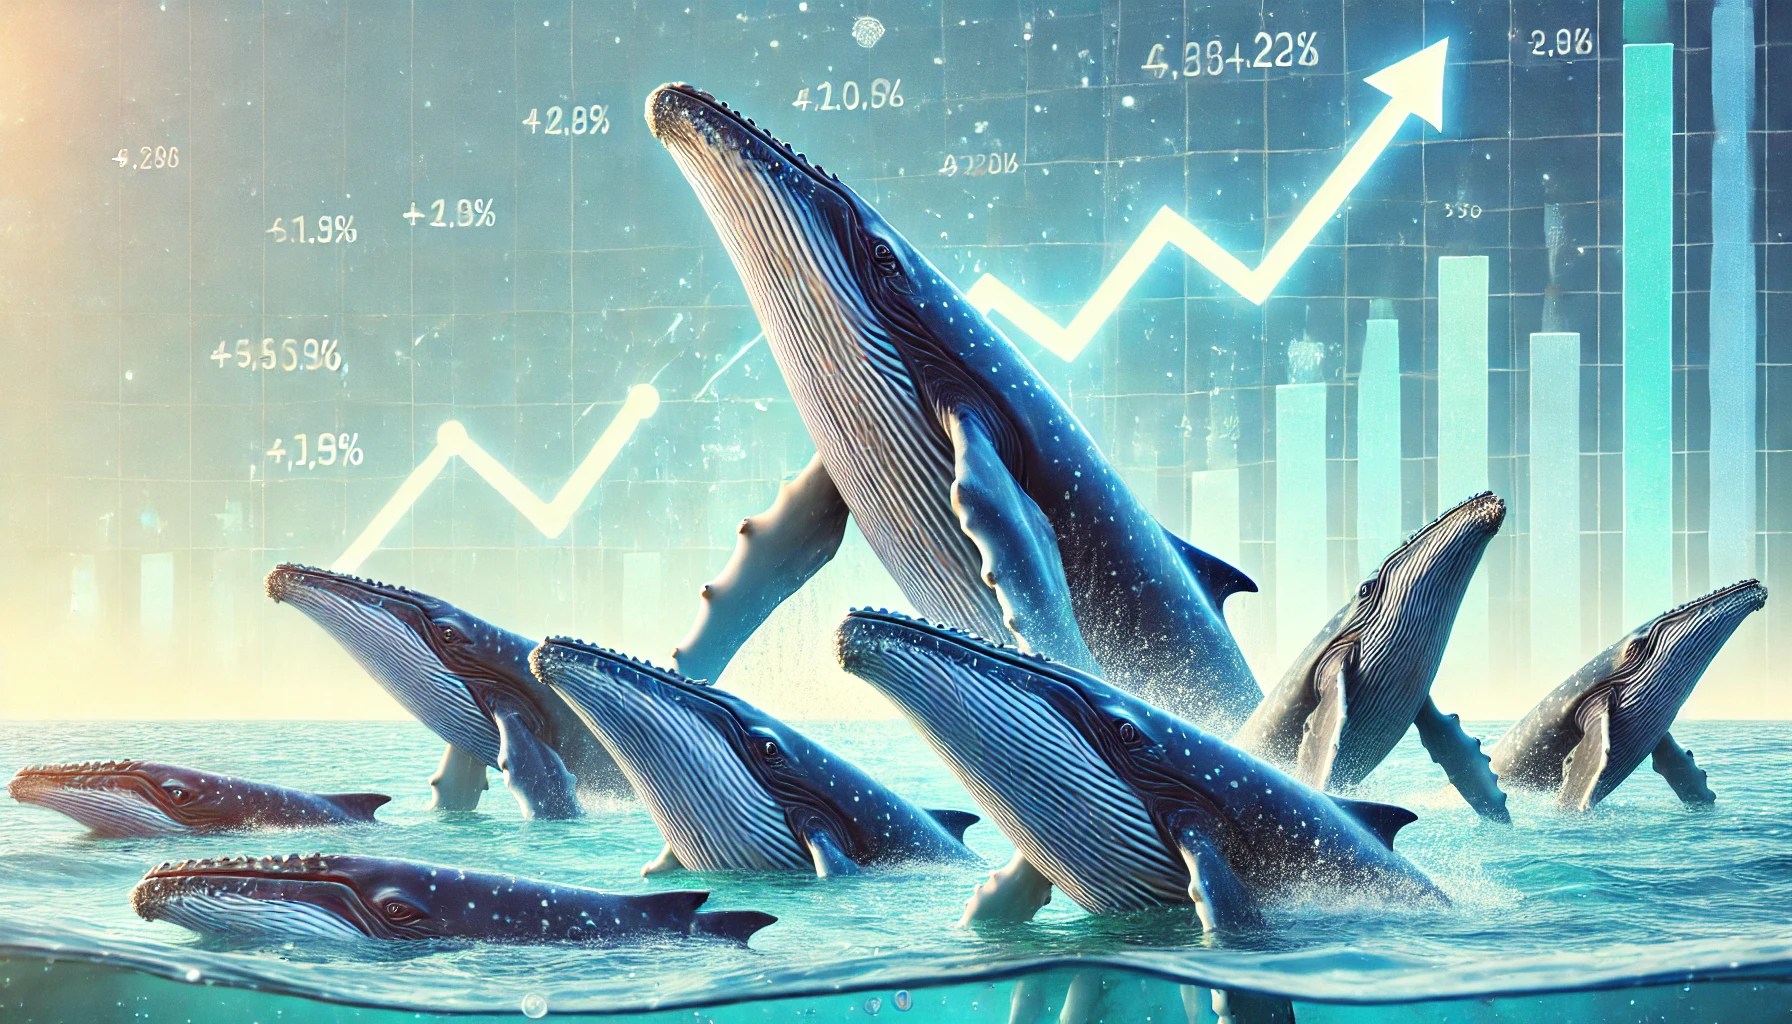 Toncoin (TON) Whales Just Went On $342 Million Buying Spree, Data Shows